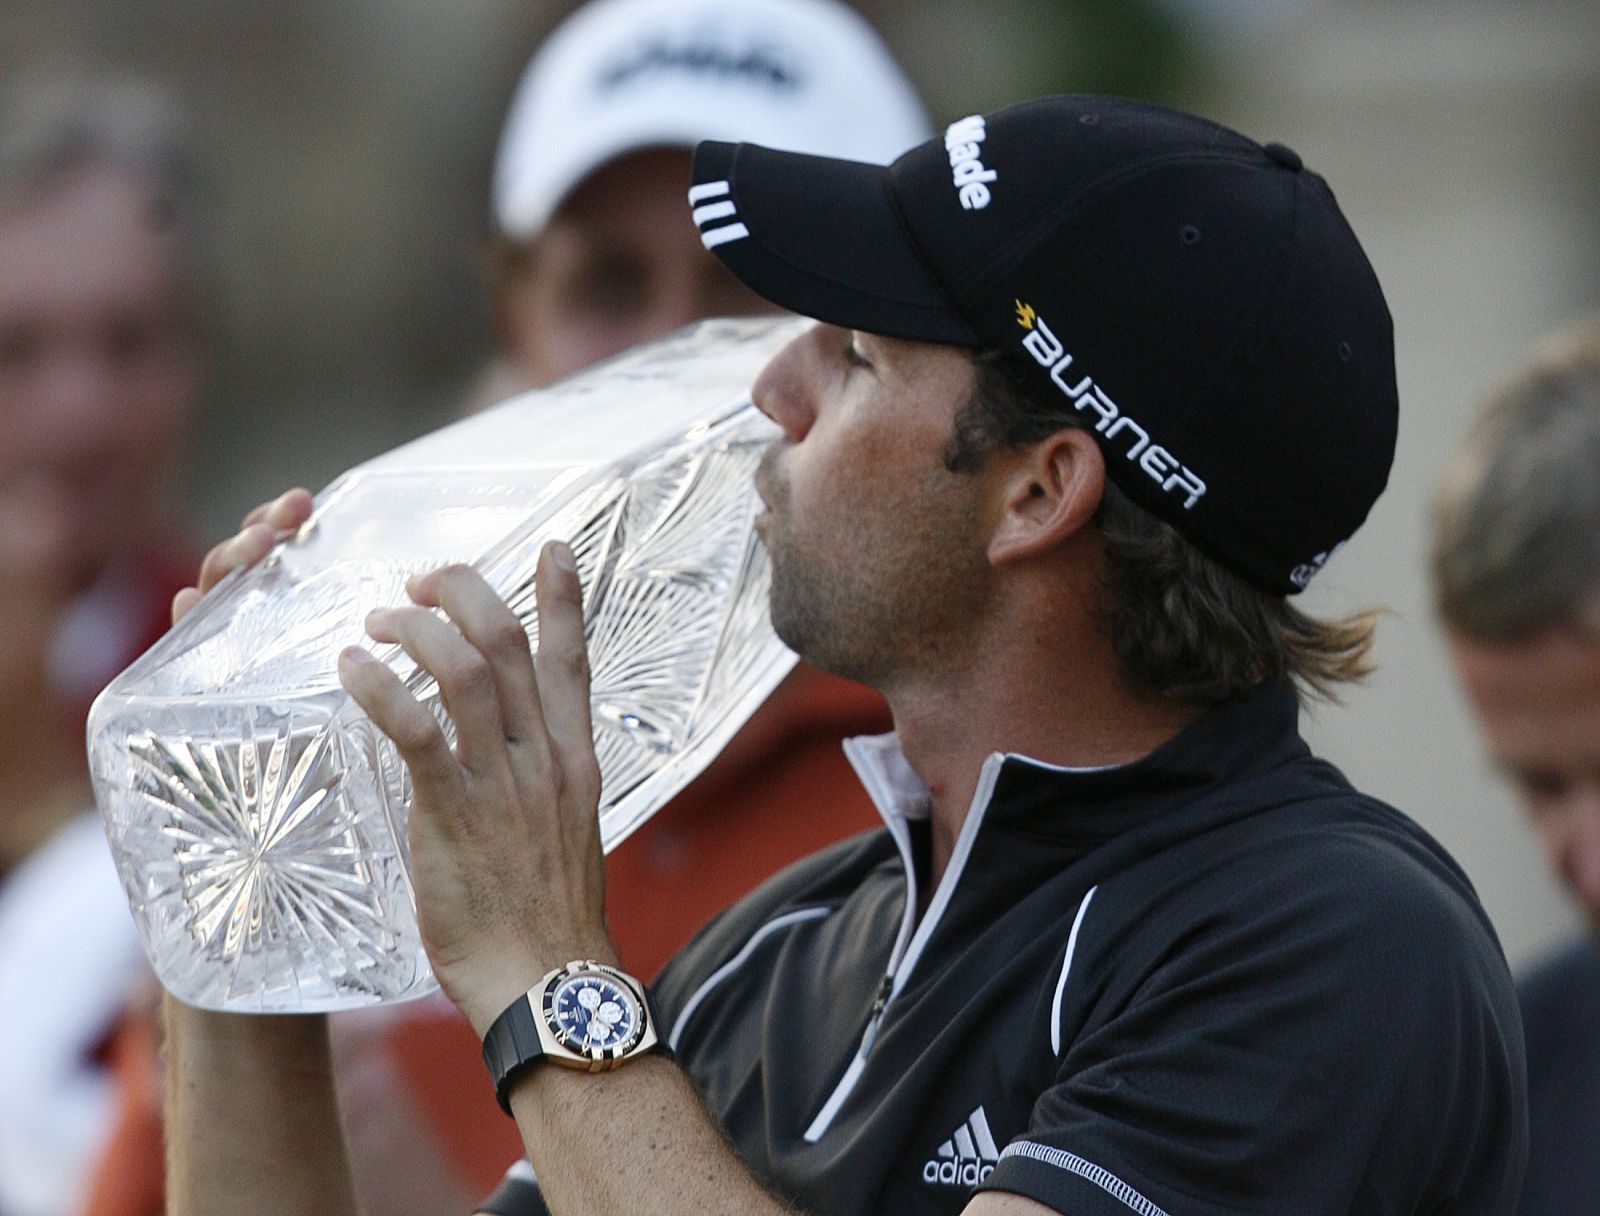 Sergio Garcia of Spain kisses the trophy after his victory in the Players Championship in Ponte Vedra